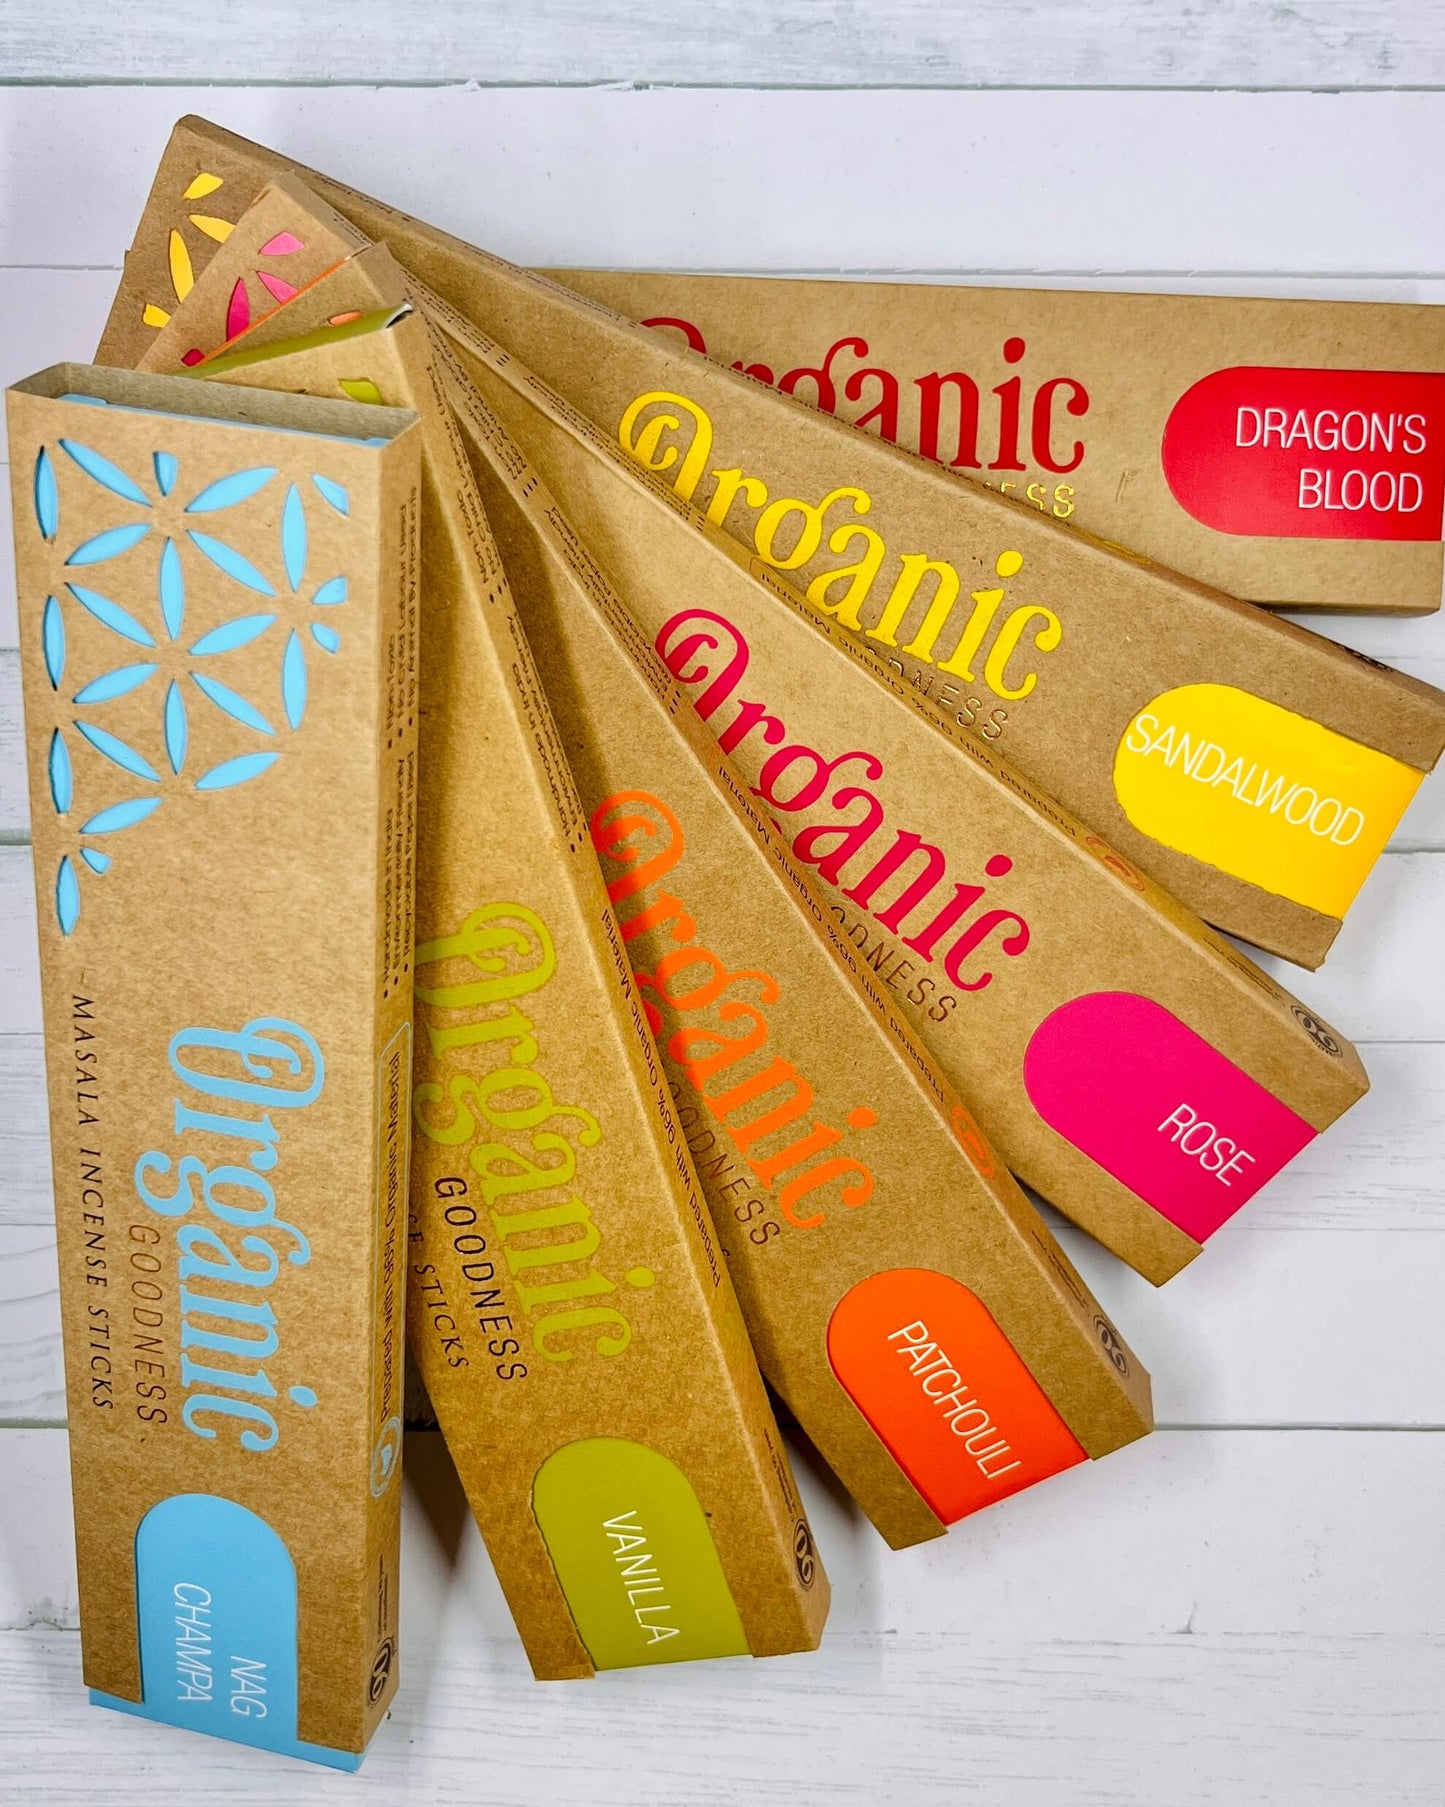 Organic Goodness Assorted 6 Pack